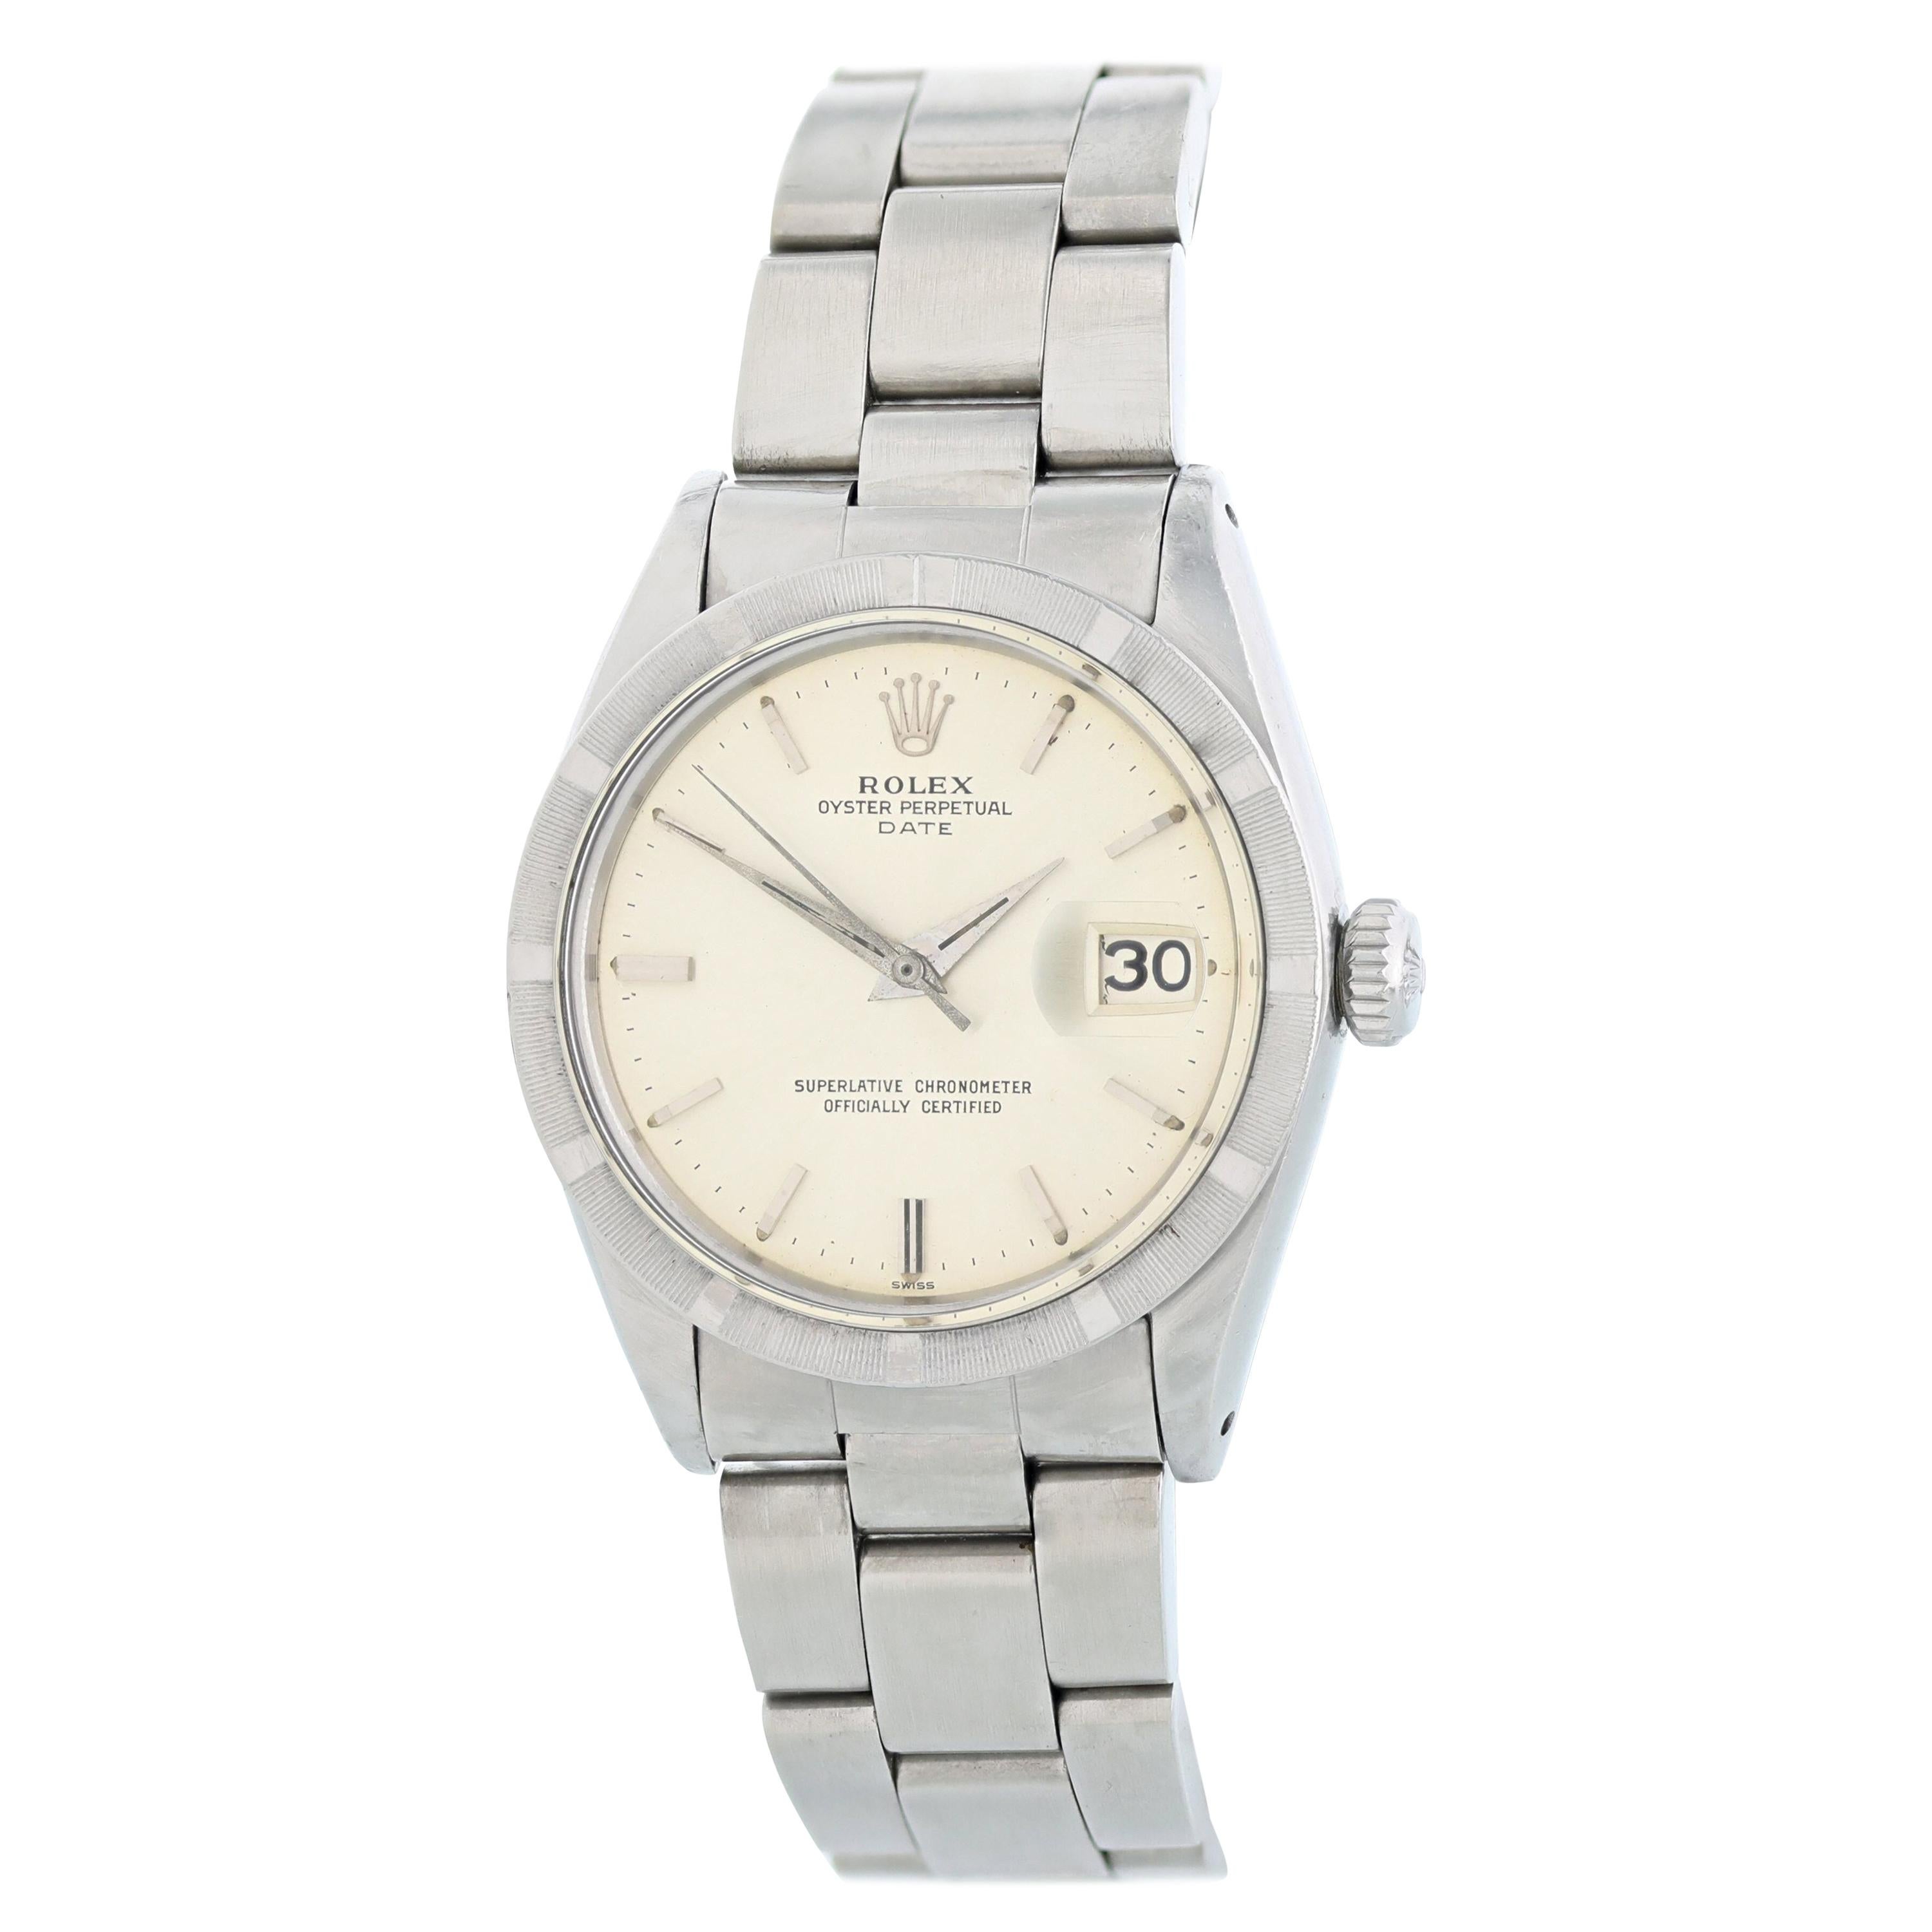 Rolex Oyster Perpetual Date 1501 Vintage Men's Watch